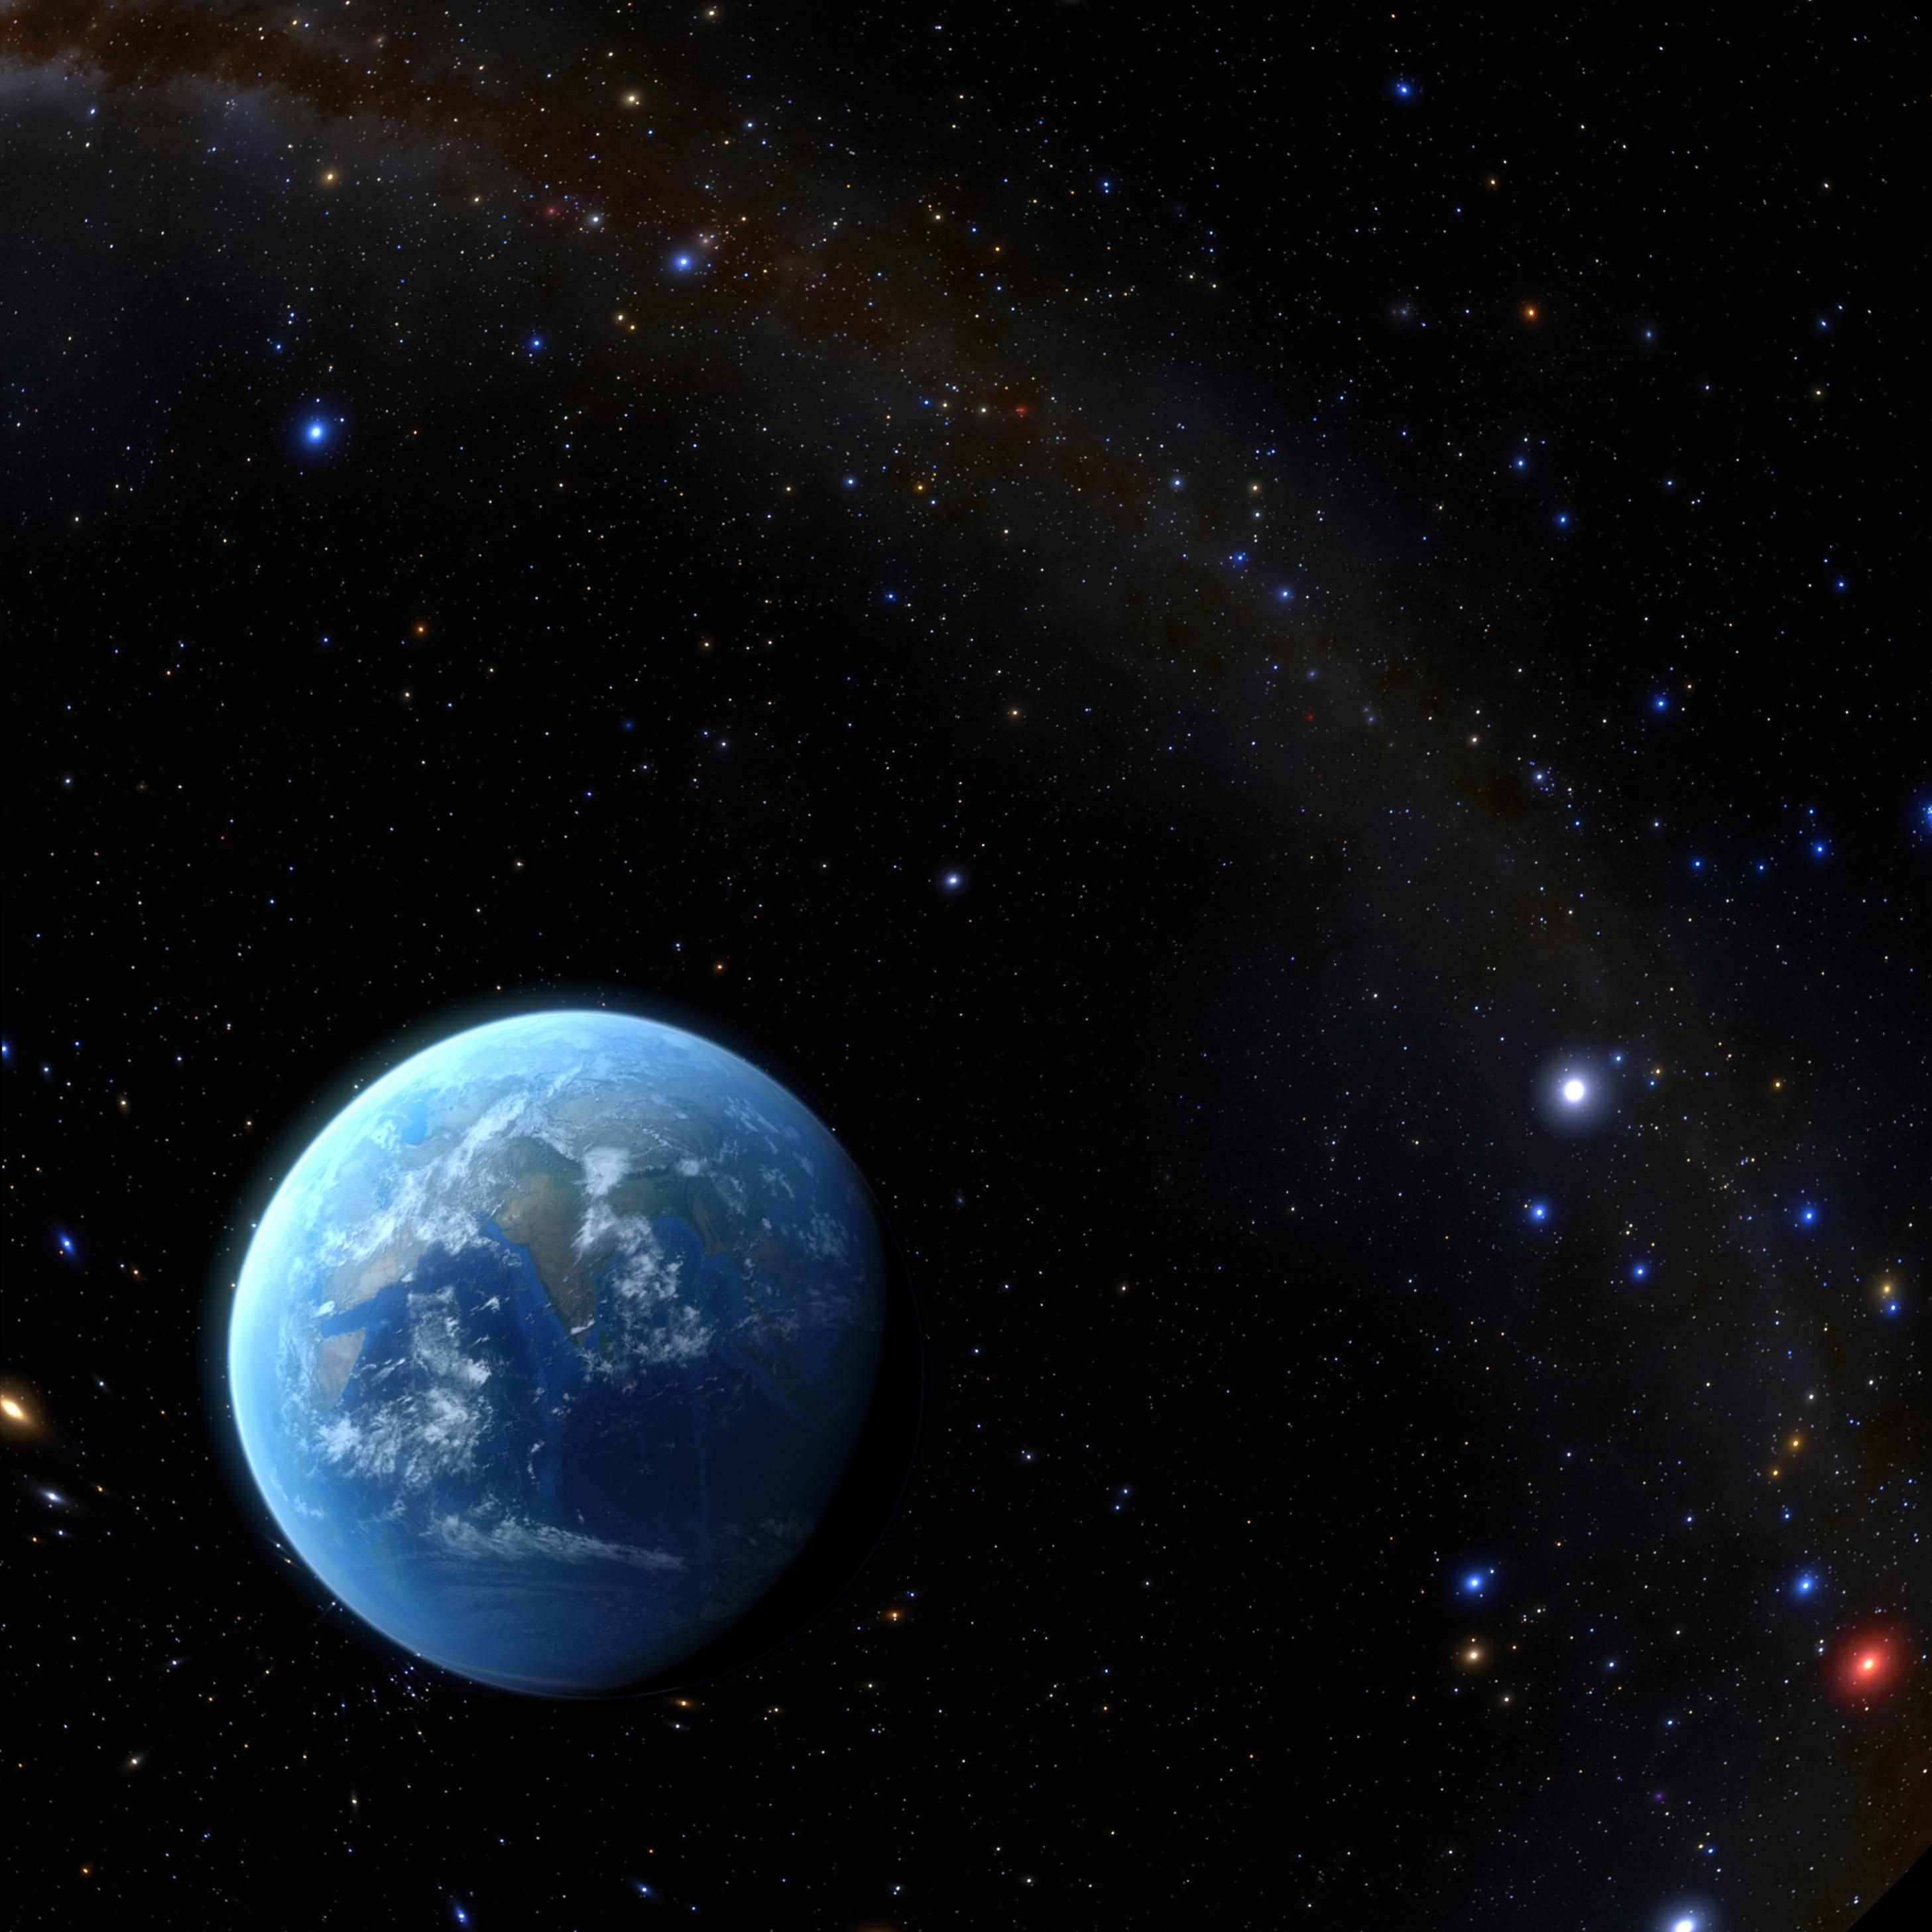 The Hong Kong Space Museum will screen a new sky show, "The Sun, Our Living Star", at its Space Theatre from tomorrow (May 1) and highlight the close relationship between the sun and humans. Image shows a conceptual illustration of the earth in space, which stands as a blue oasis in a vast cosmic desert, uniquely the only place in the entire universe where life is known to exist. (Source of image: European Southern Observatory)